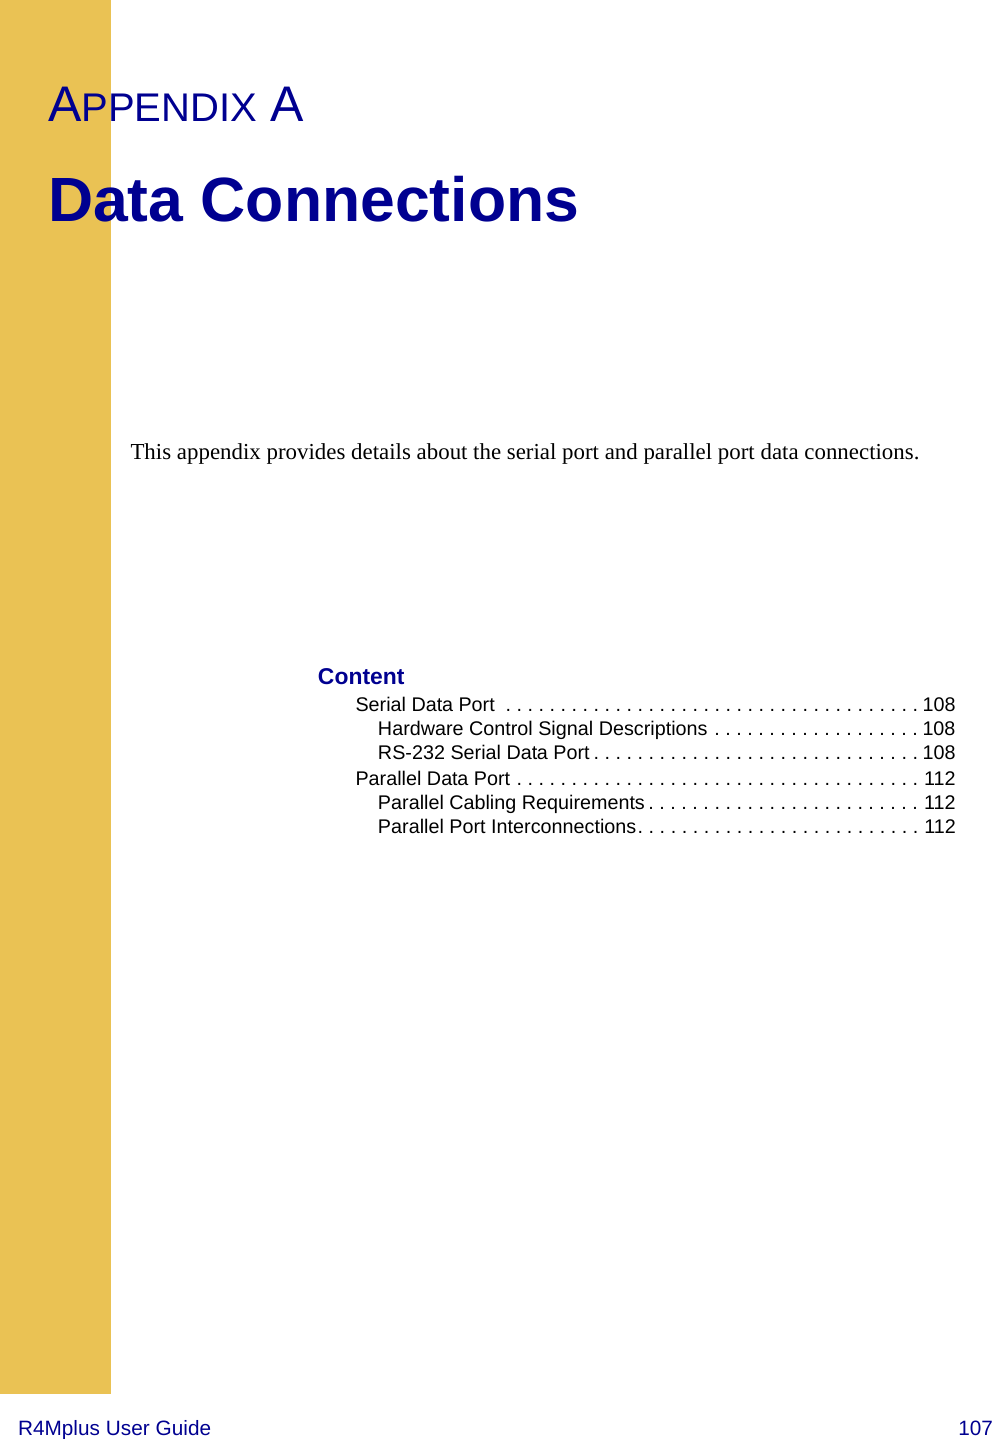 R4Mplus User Guide  107APPENDIX AData ConnectionsThis appendix provides details about the serial port and parallel port data connections.ContentSerial Data Port  . . . . . . . . . . . . . . . . . . . . . . . . . . . . . . . . . . . . . . 108Hardware Control Signal Descriptions . . . . . . . . . . . . . . . . . . . 108RS-232 Serial Data Port . . . . . . . . . . . . . . . . . . . . . . . . . . . . . . 108Parallel Data Port . . . . . . . . . . . . . . . . . . . . . . . . . . . . . . . . . . . . . 112Parallel Cabling Requirements . . . . . . . . . . . . . . . . . . . . . . . . . 112Parallel Port Interconnections. . . . . . . . . . . . . . . . . . . . . . . . . . 112